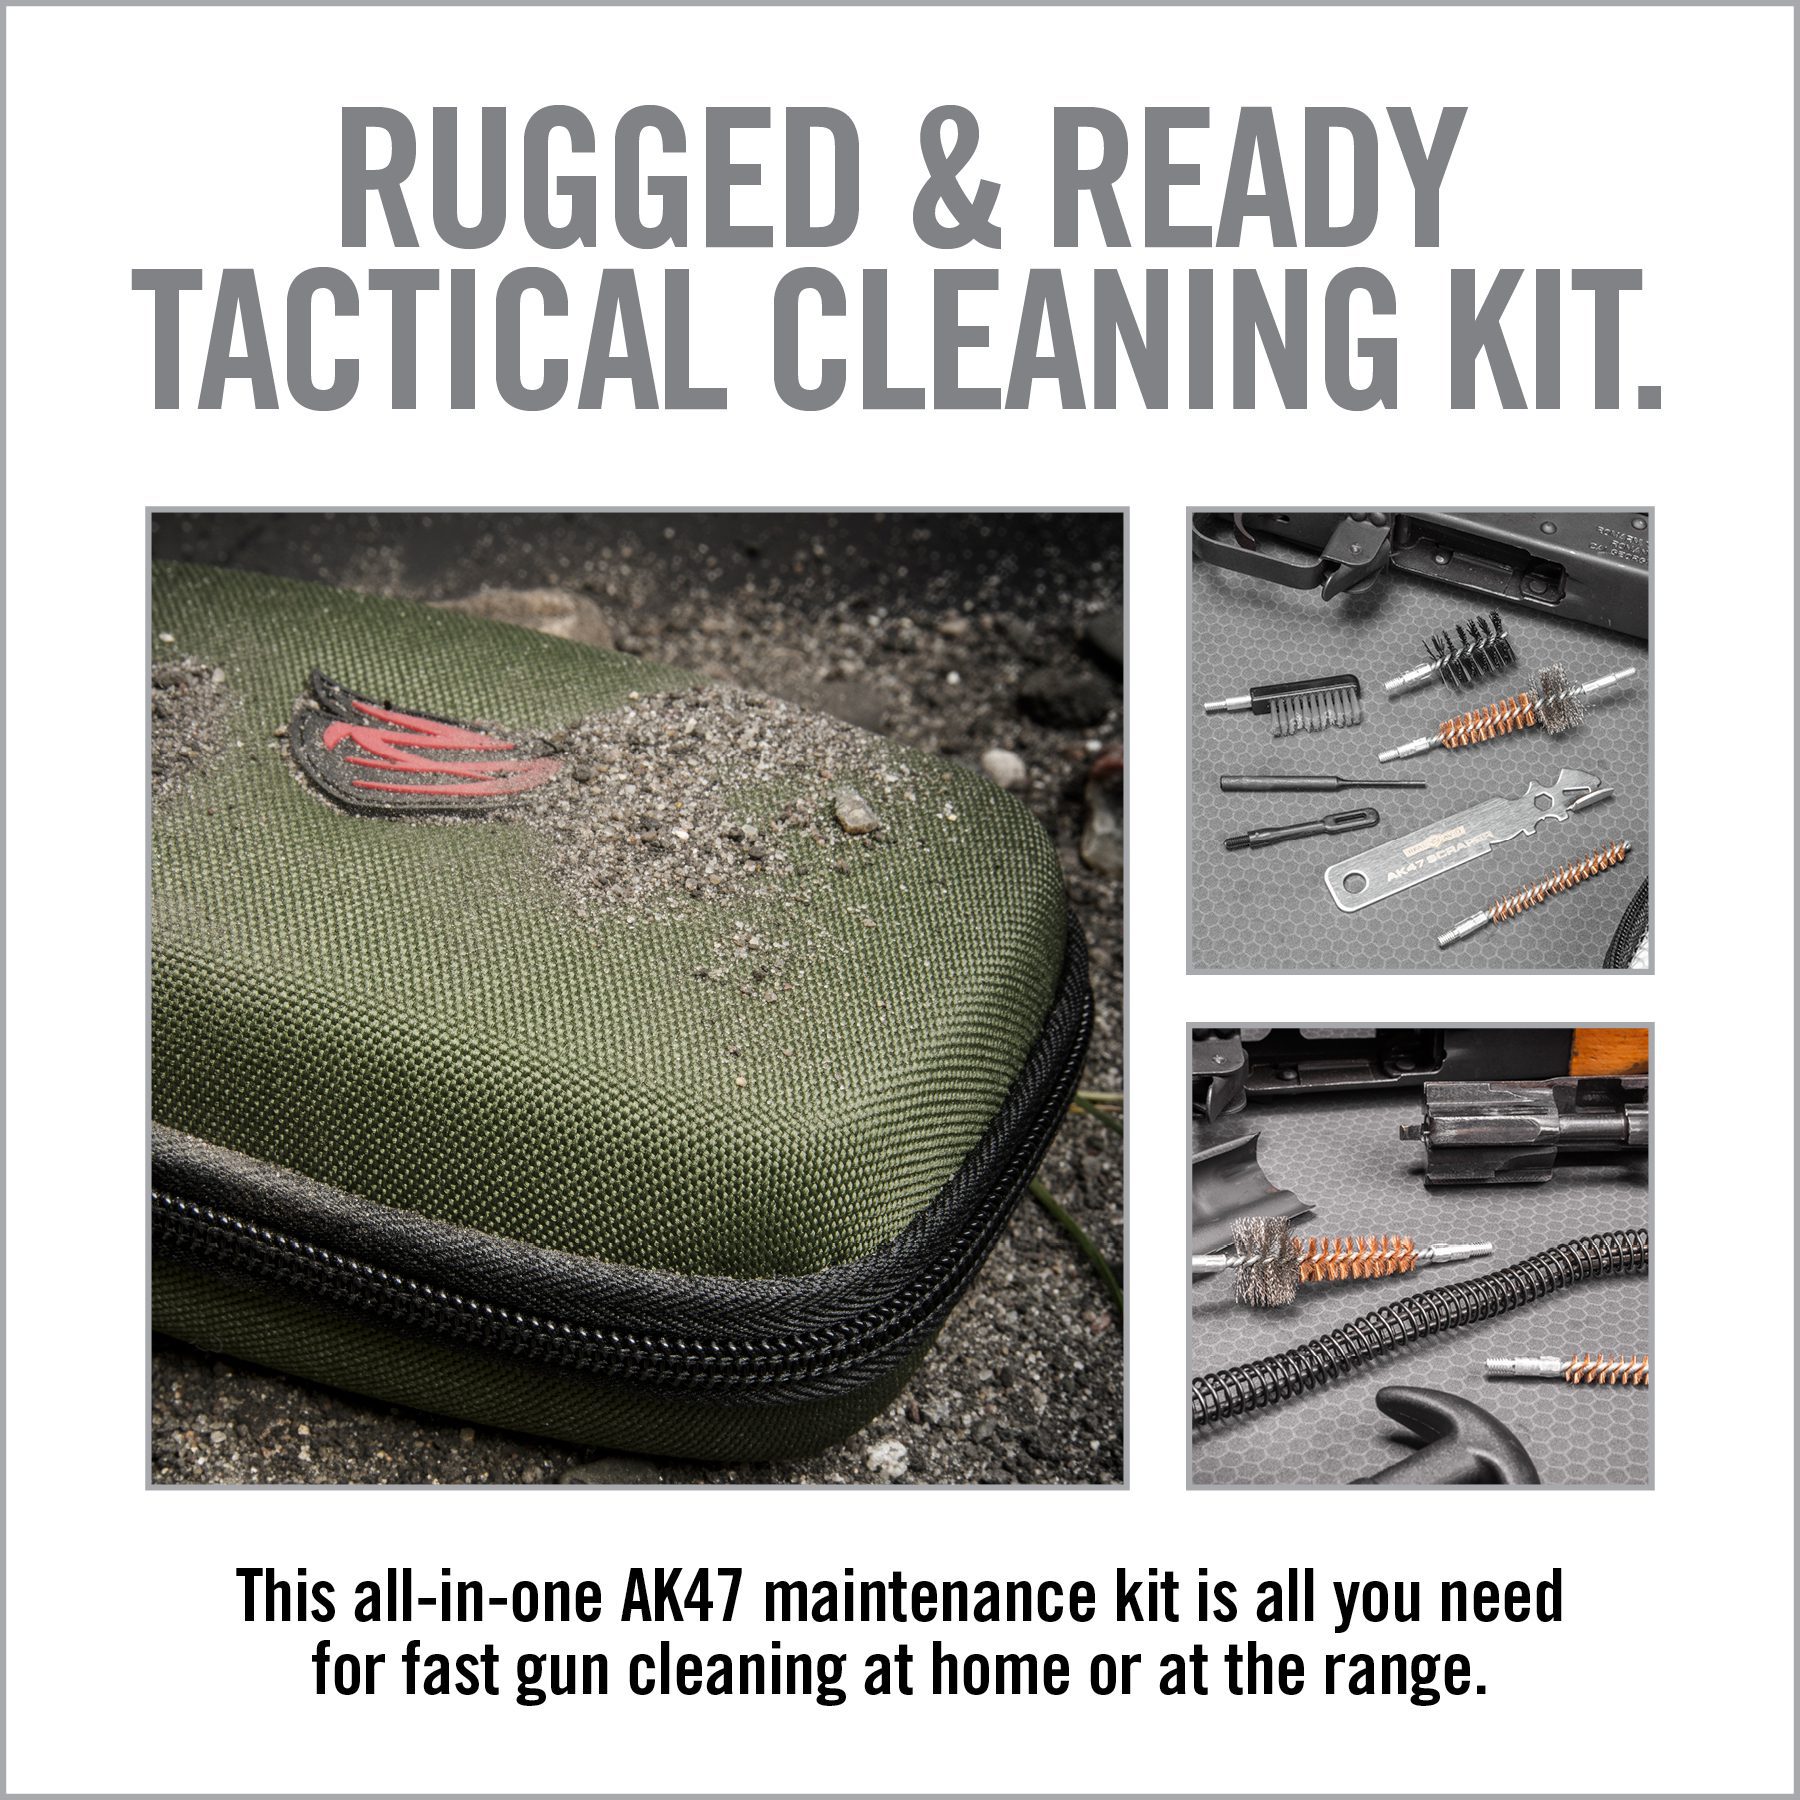 the rugged & ready tactical cleaning kit is in its original packaging